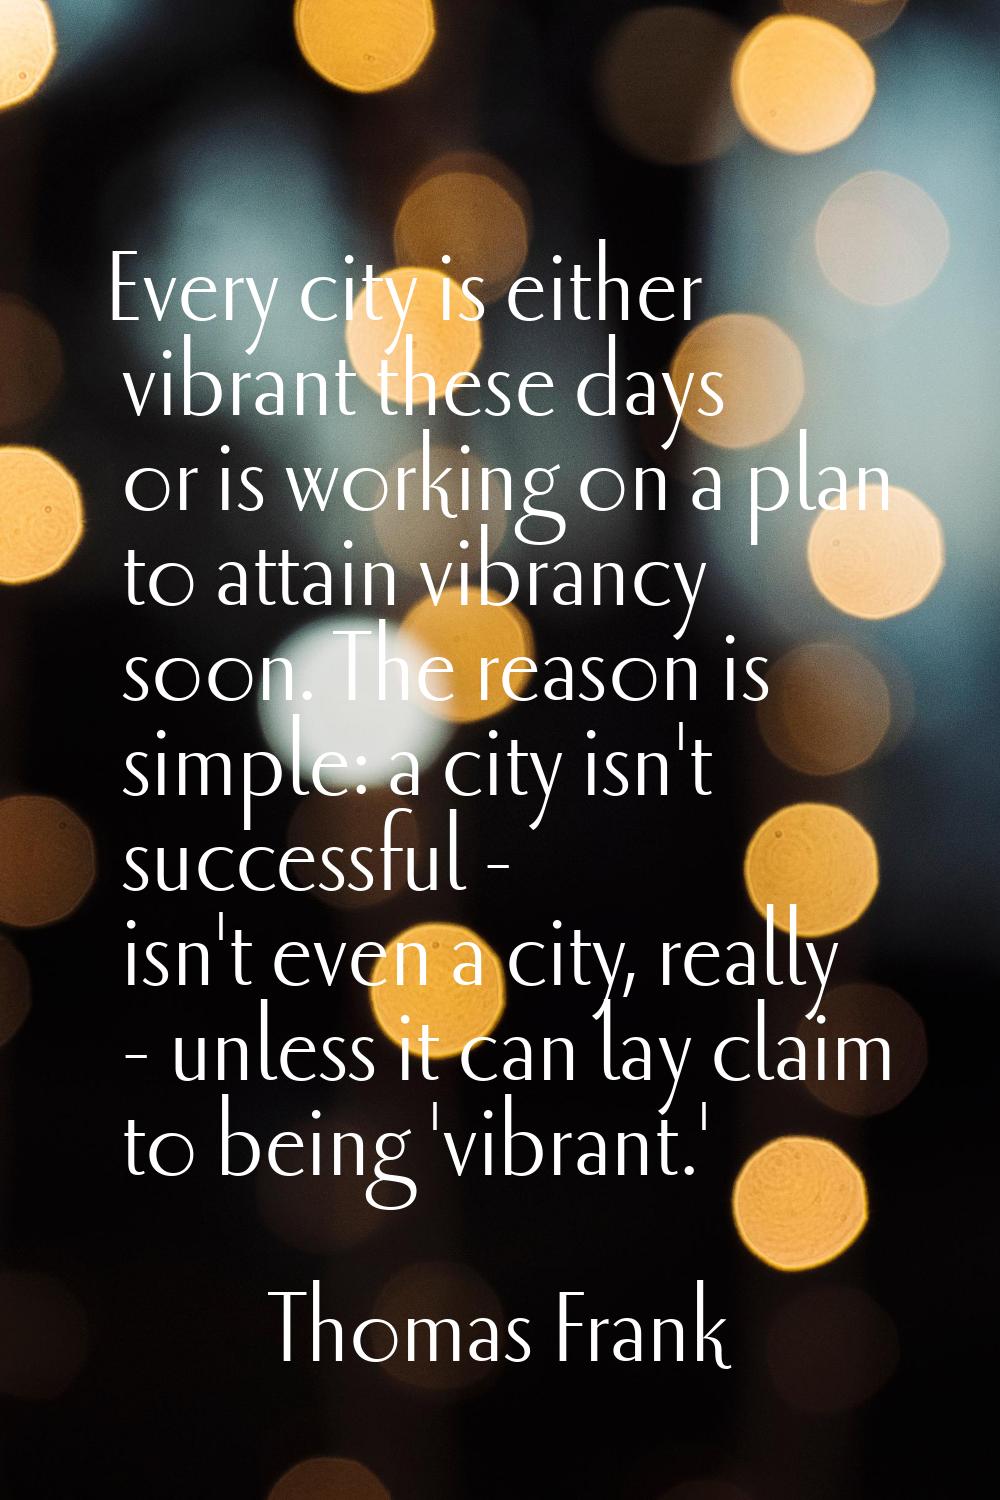 Every city is either vibrant these days or is working on a plan to attain vibrancy soon. The reason